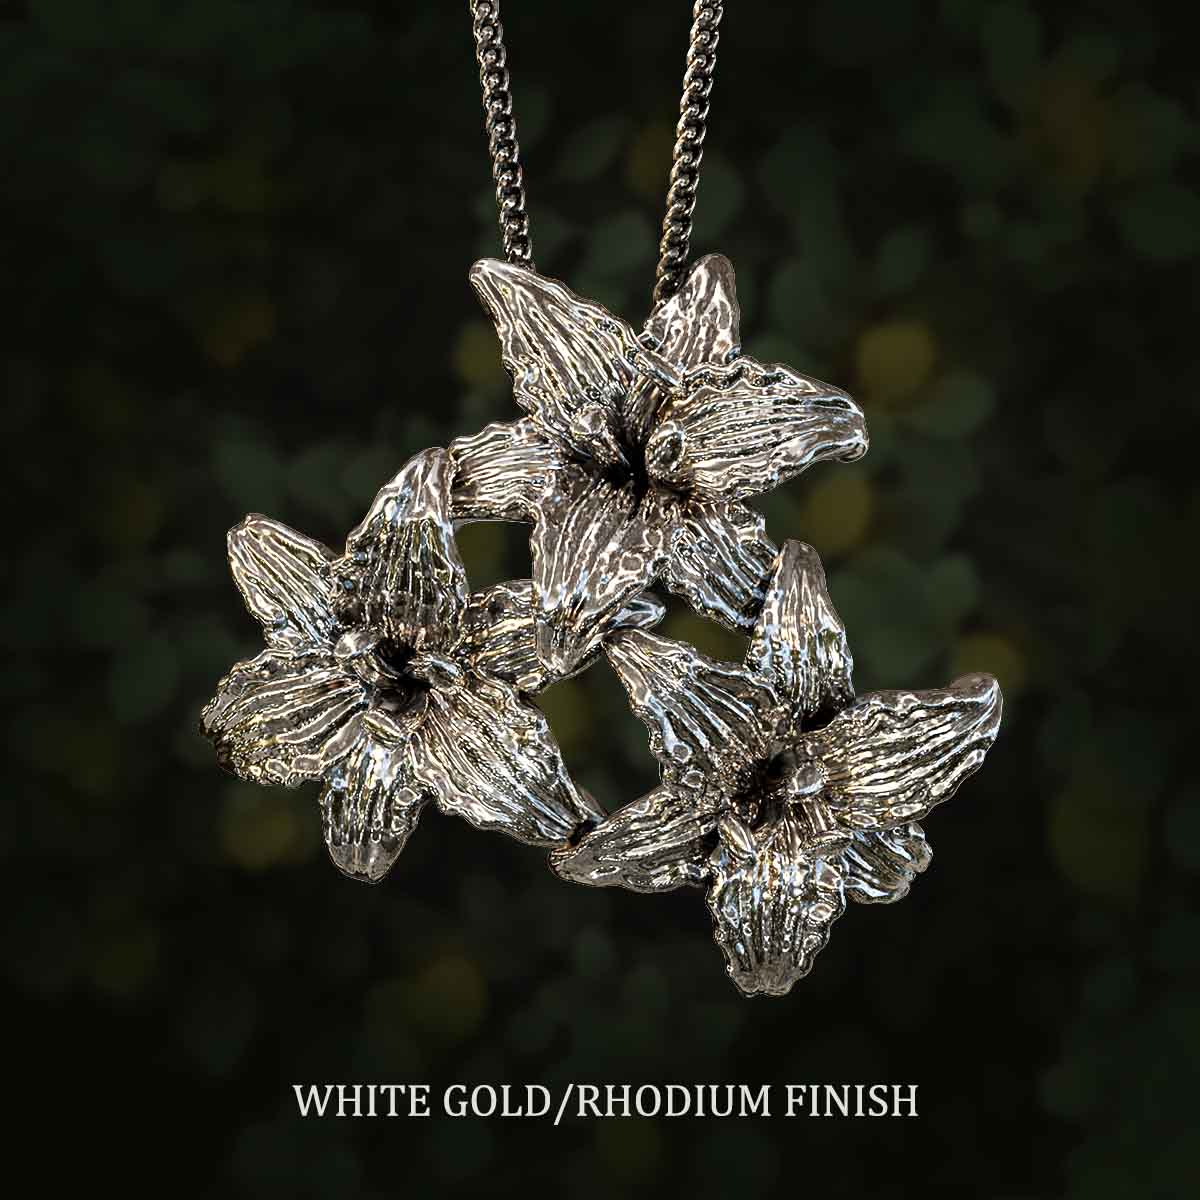     White-Gold-Rhodium-Finish-Three-Daylily-Flowers-Pendant-Jewelry-For-Necklace